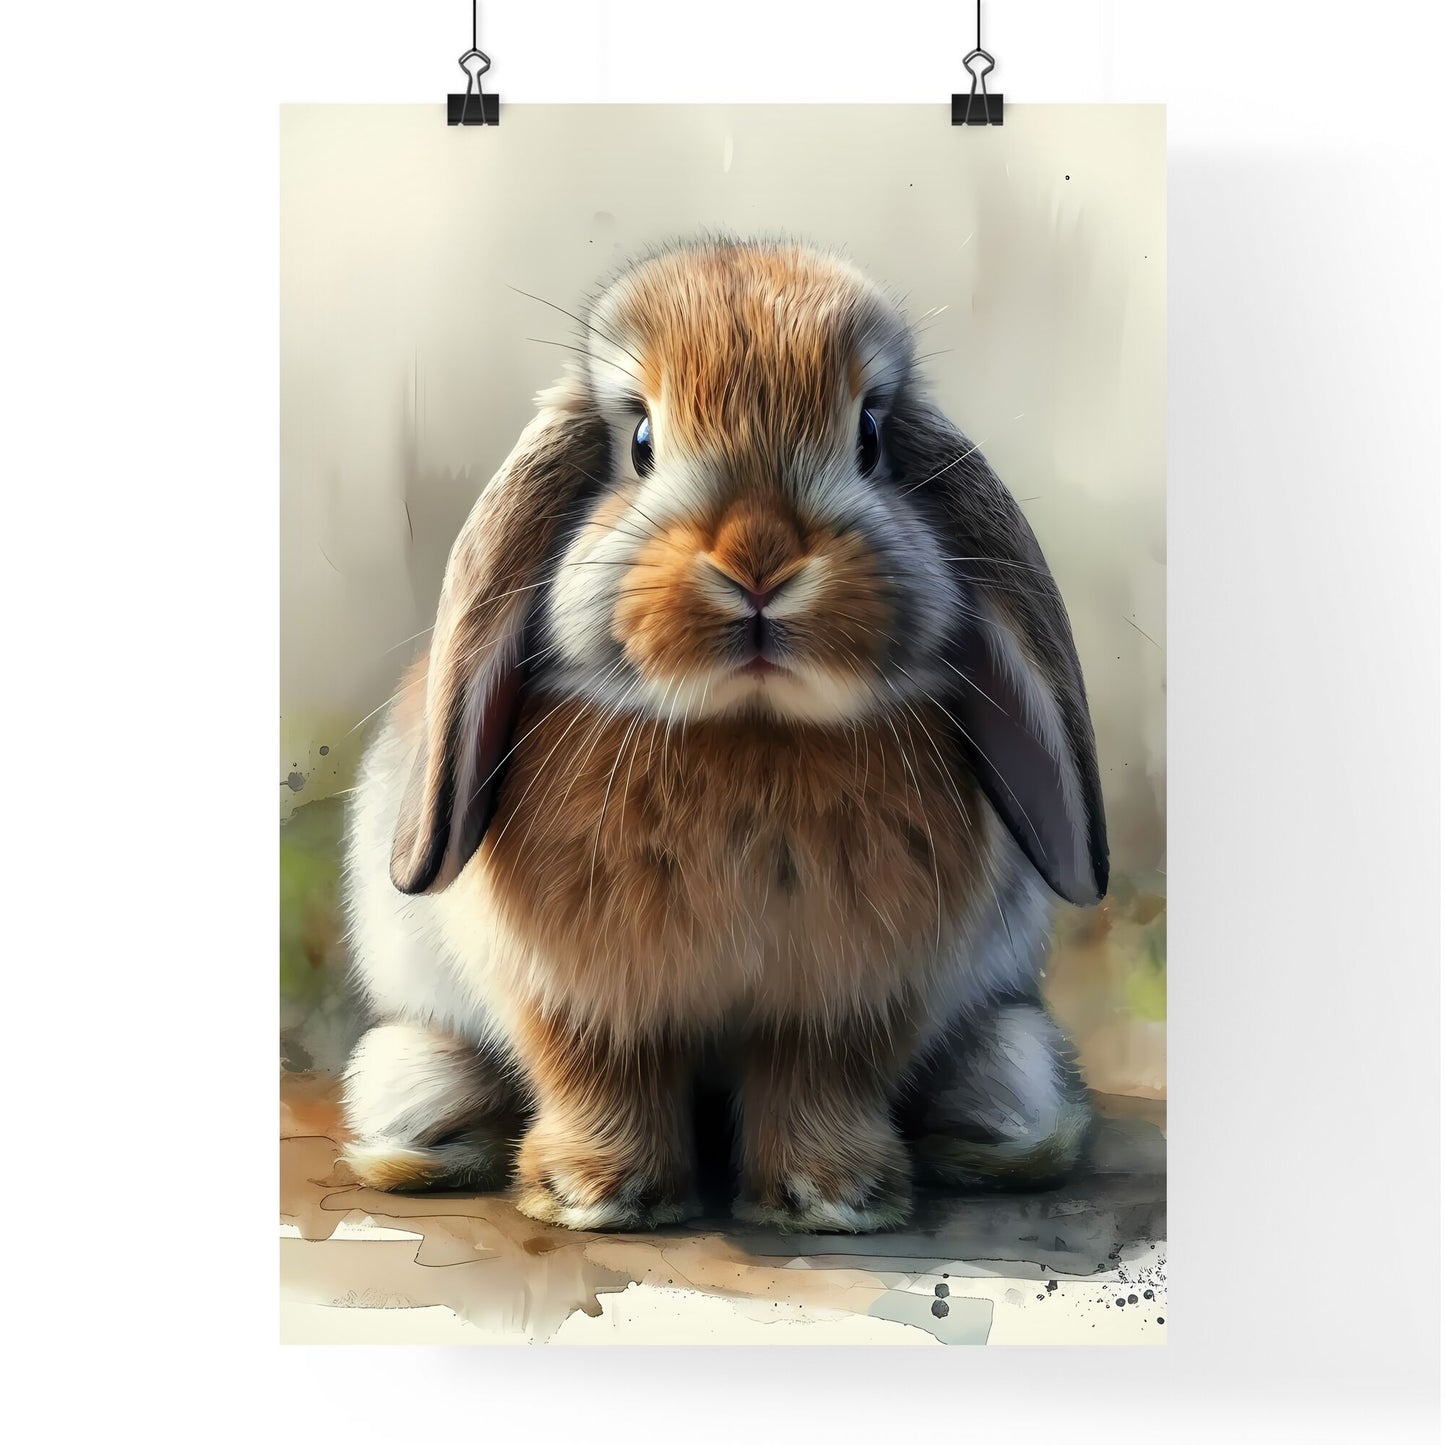 A cute fluffy bunny, watercolor, white background - Art print of a pink and purple striped object Default Title